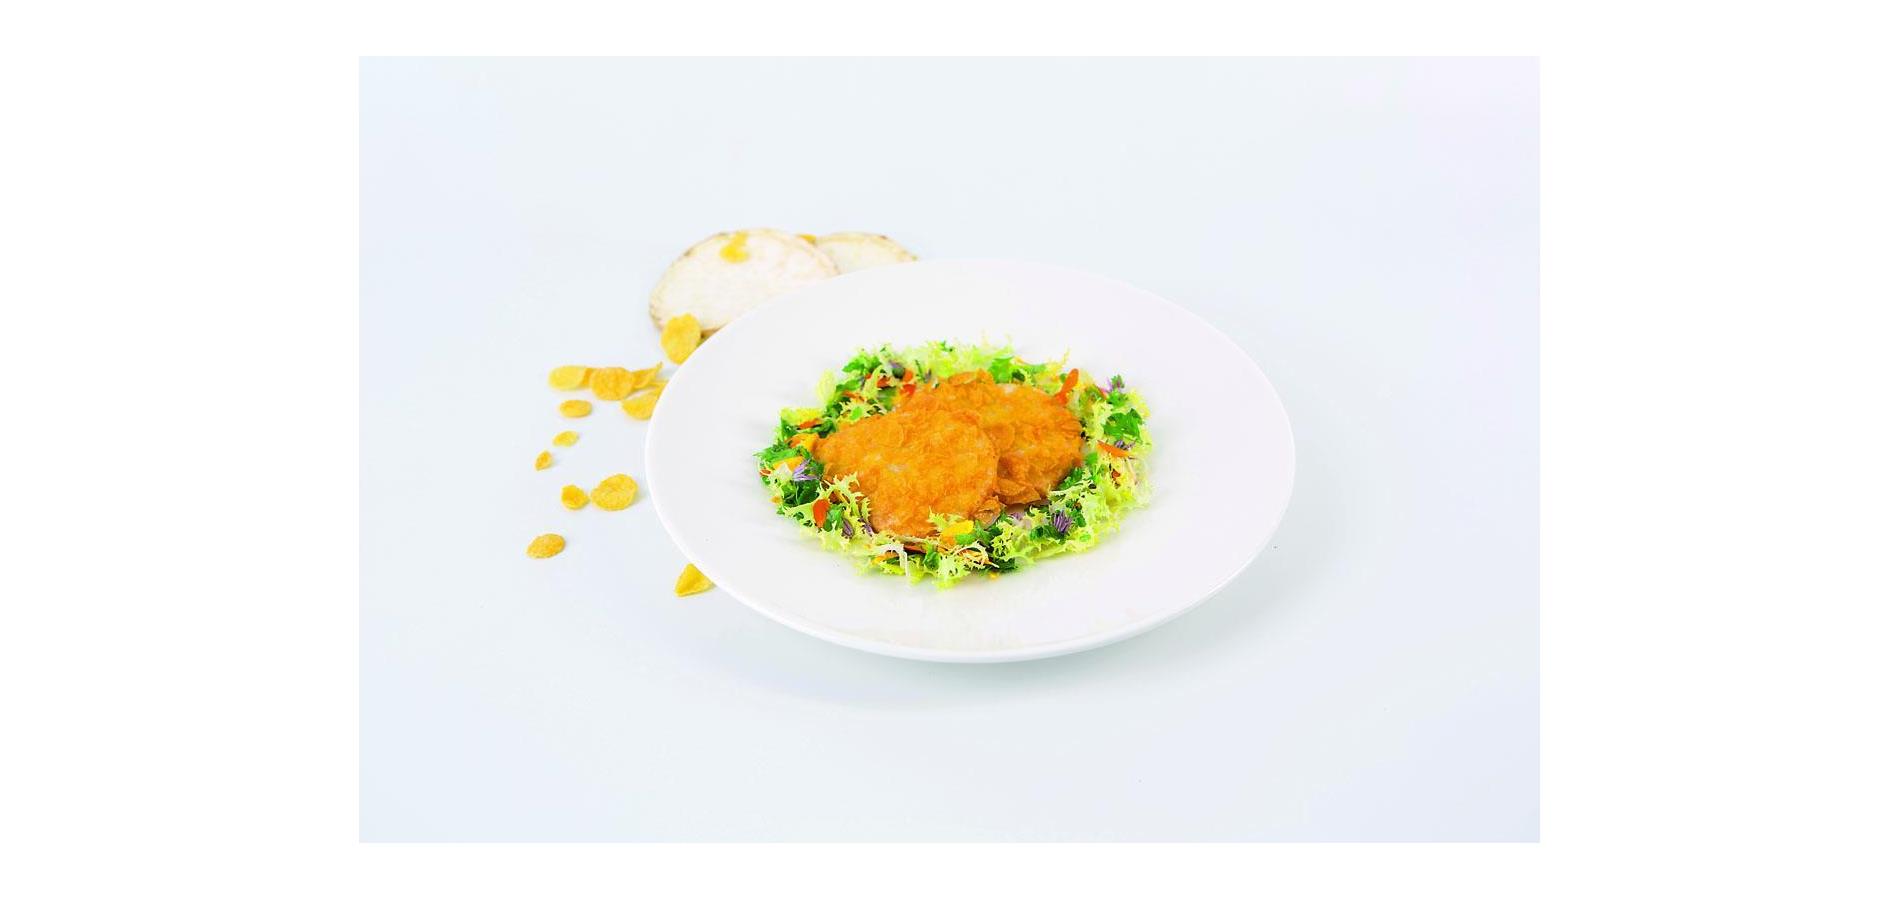 Celery cutlet baked with corn flakes and herb salad